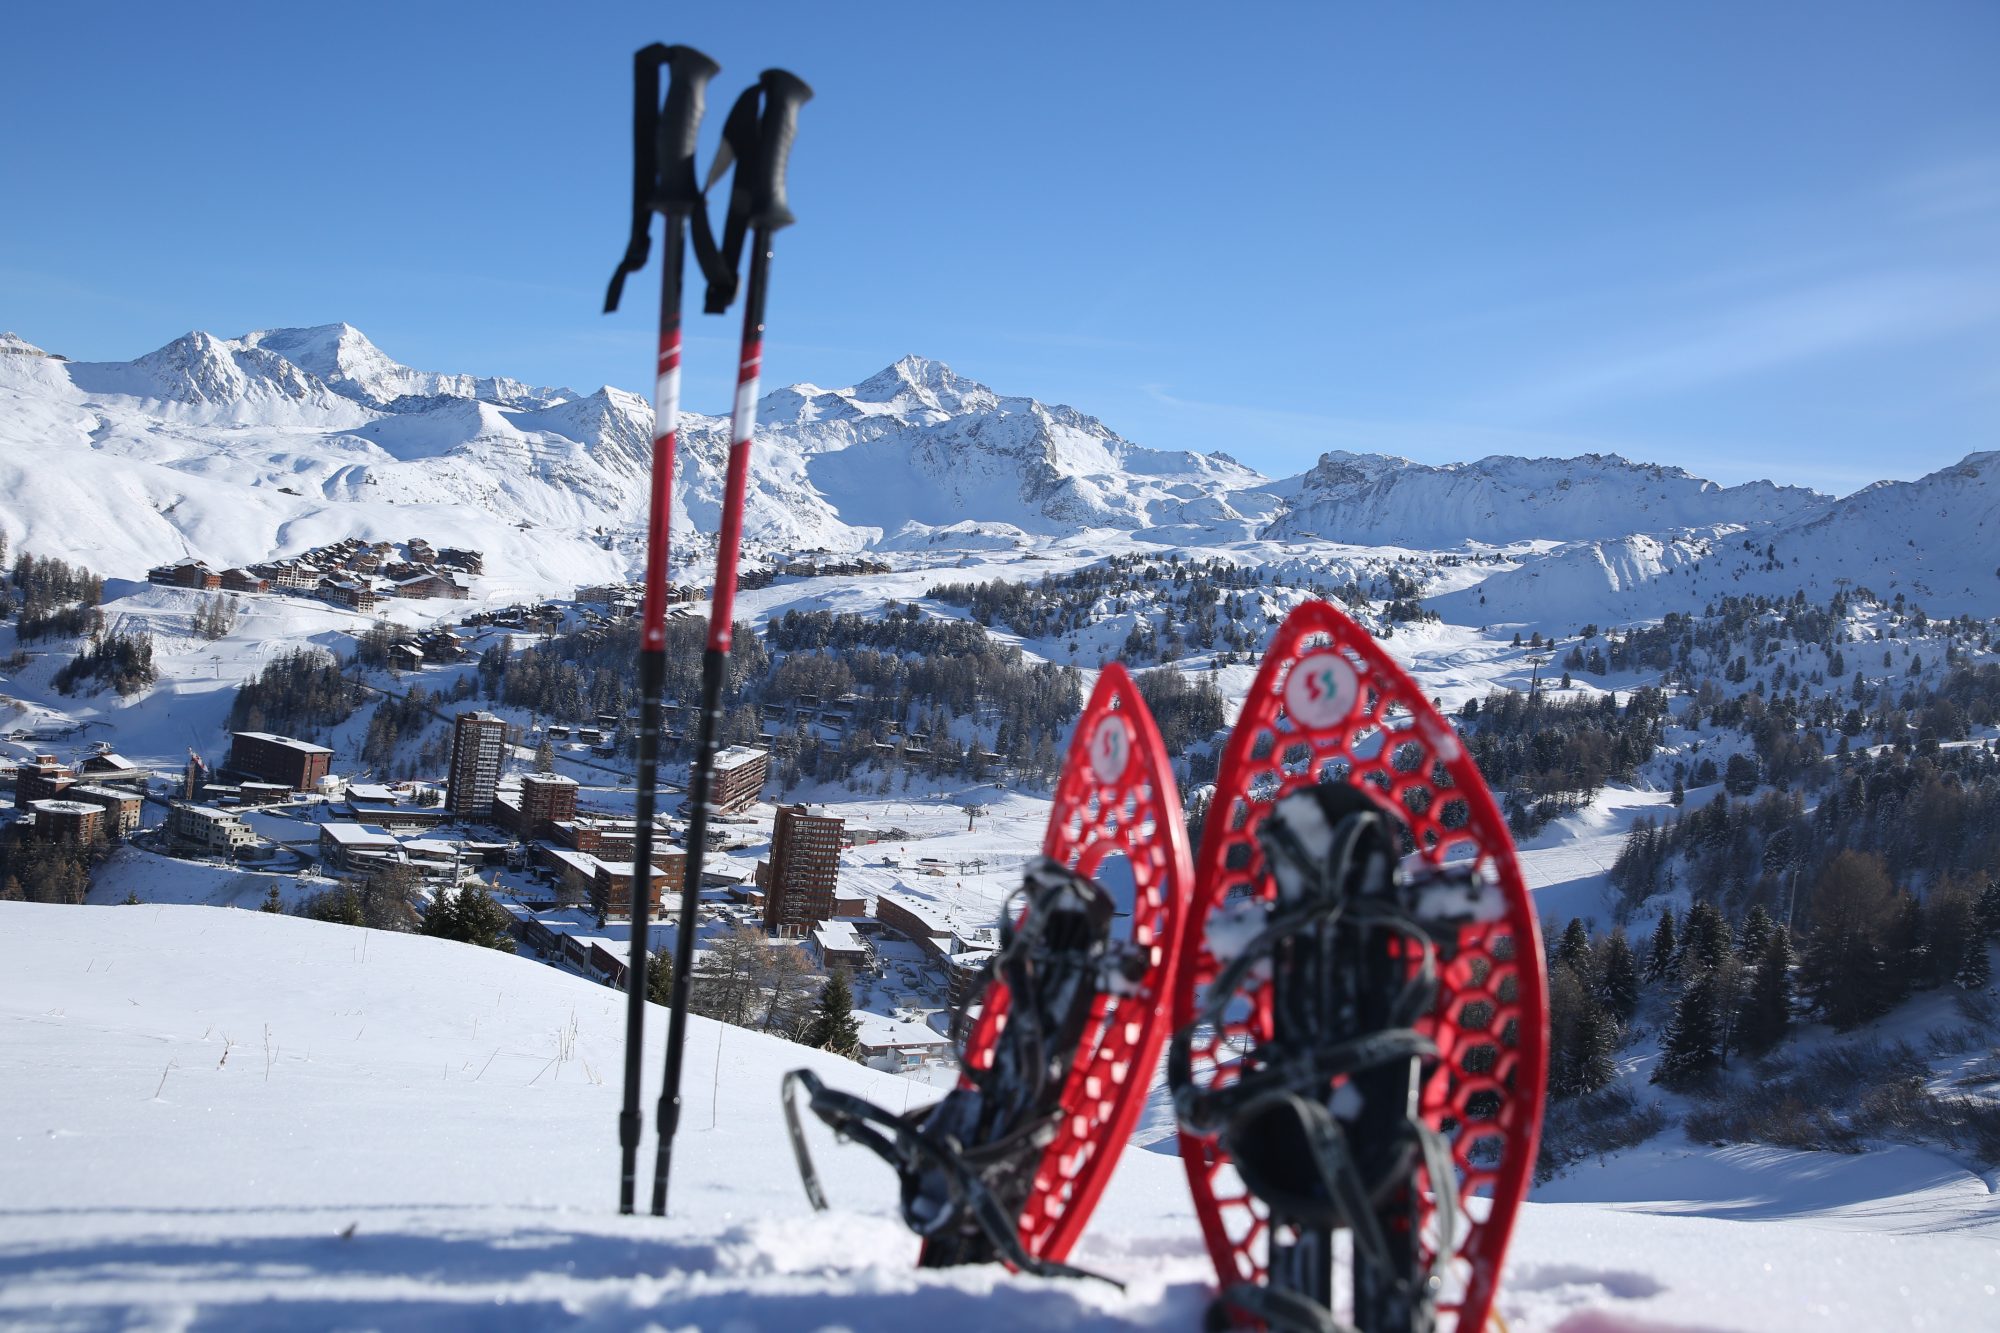 Snowshoes in La Plagne. Photo: La Plagne. What Will Happen to the English Consumers of the French Mountains after March 29?